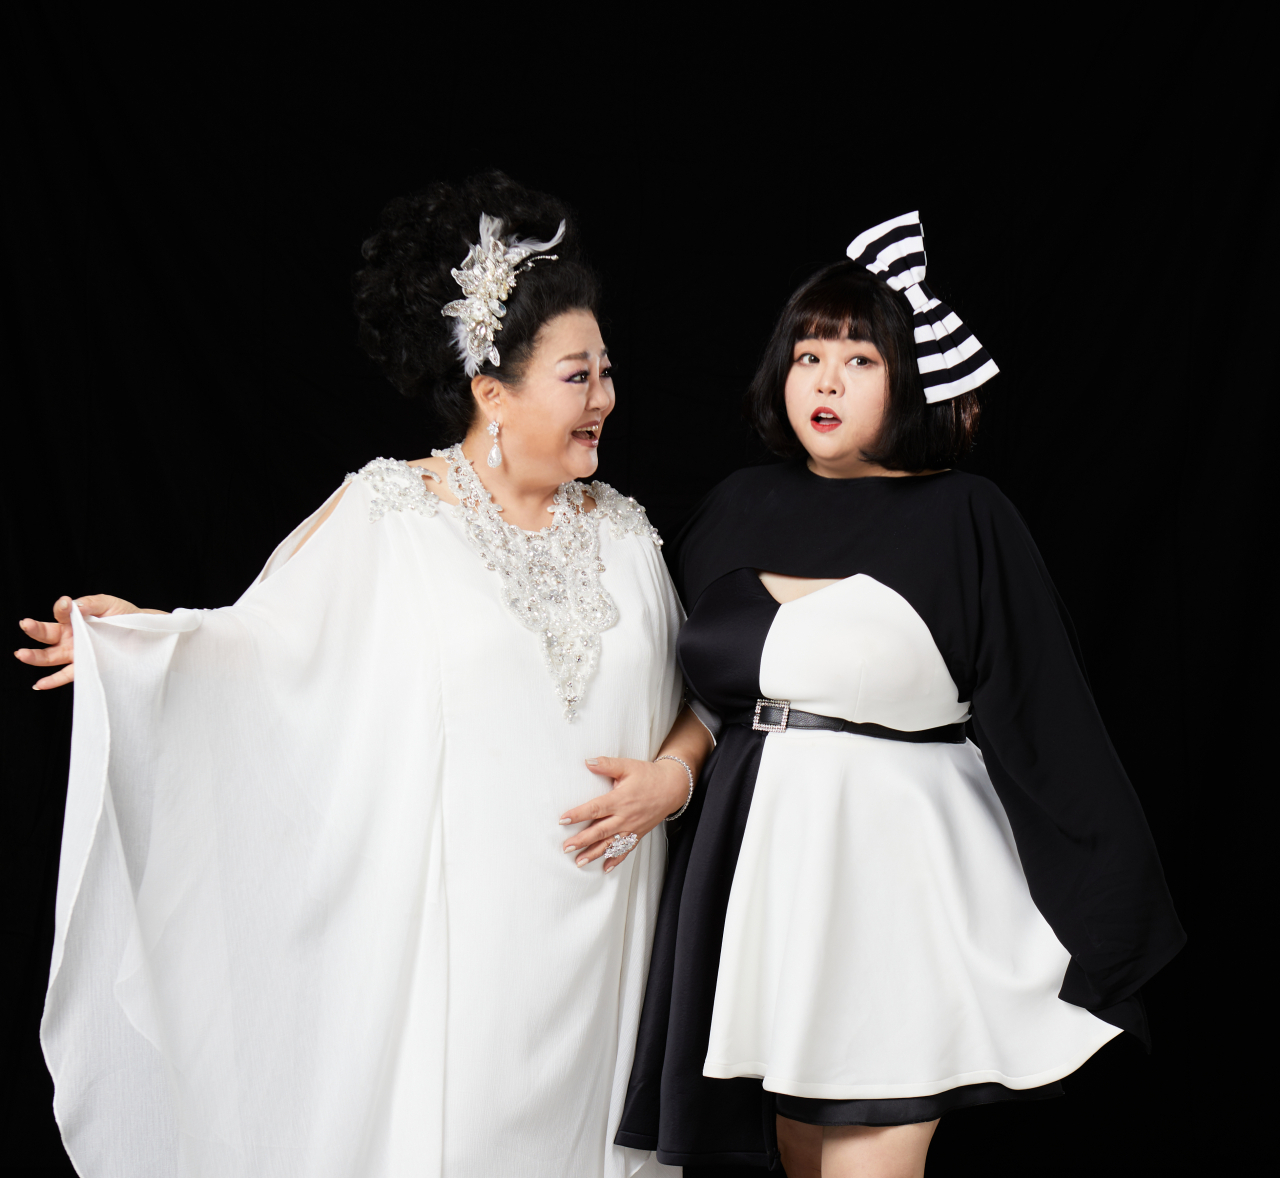 Jazz singer Yun Hee-jung (left) and her daughter, singer Kim Soo-yeon, whose stage name is Somerz (Yun Hee-jung)